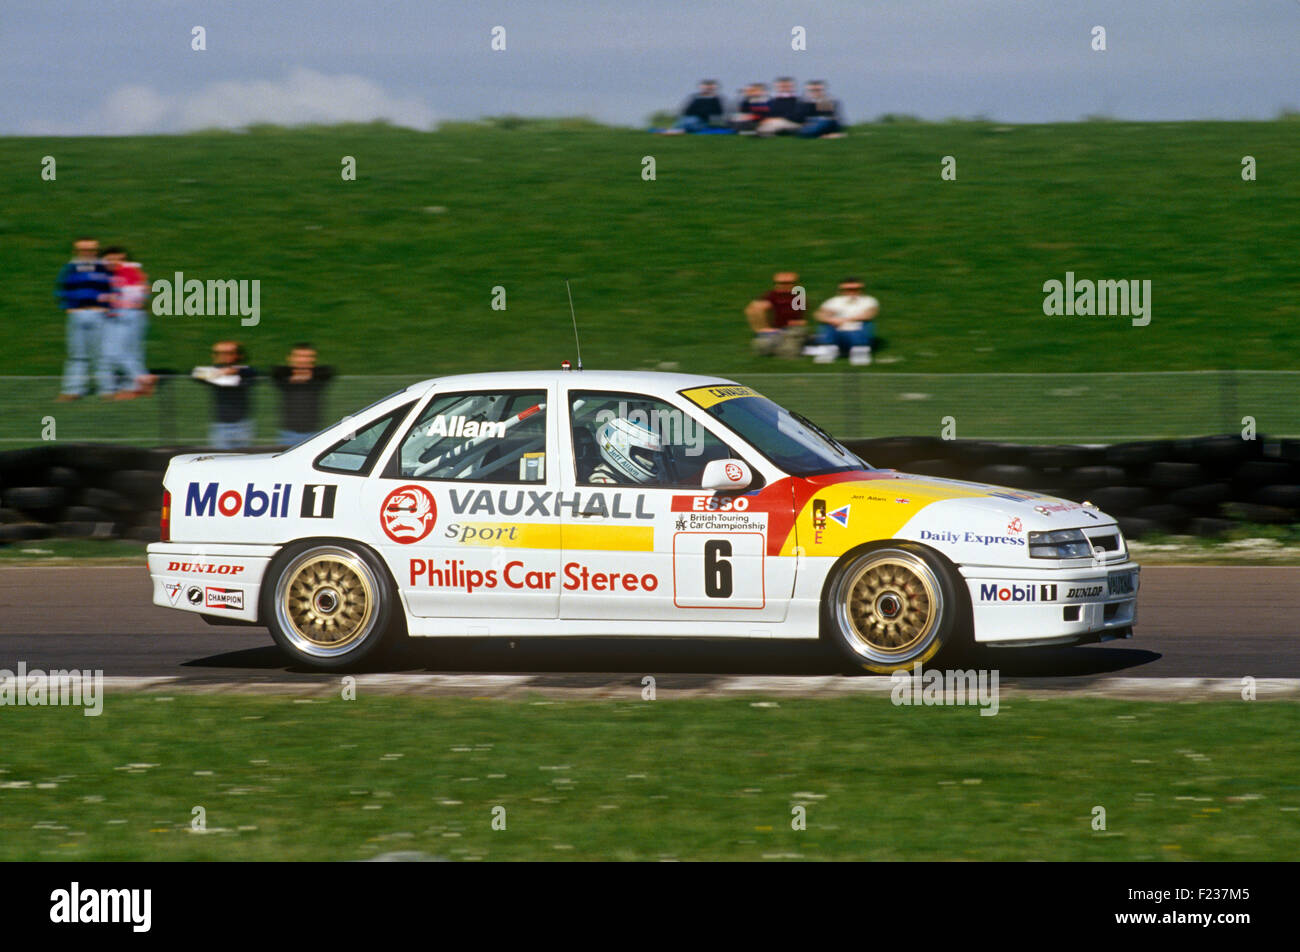 Jeff Allam in his Vauxhall Cavalier competing in the British Touring Car Championship. Stock Photo